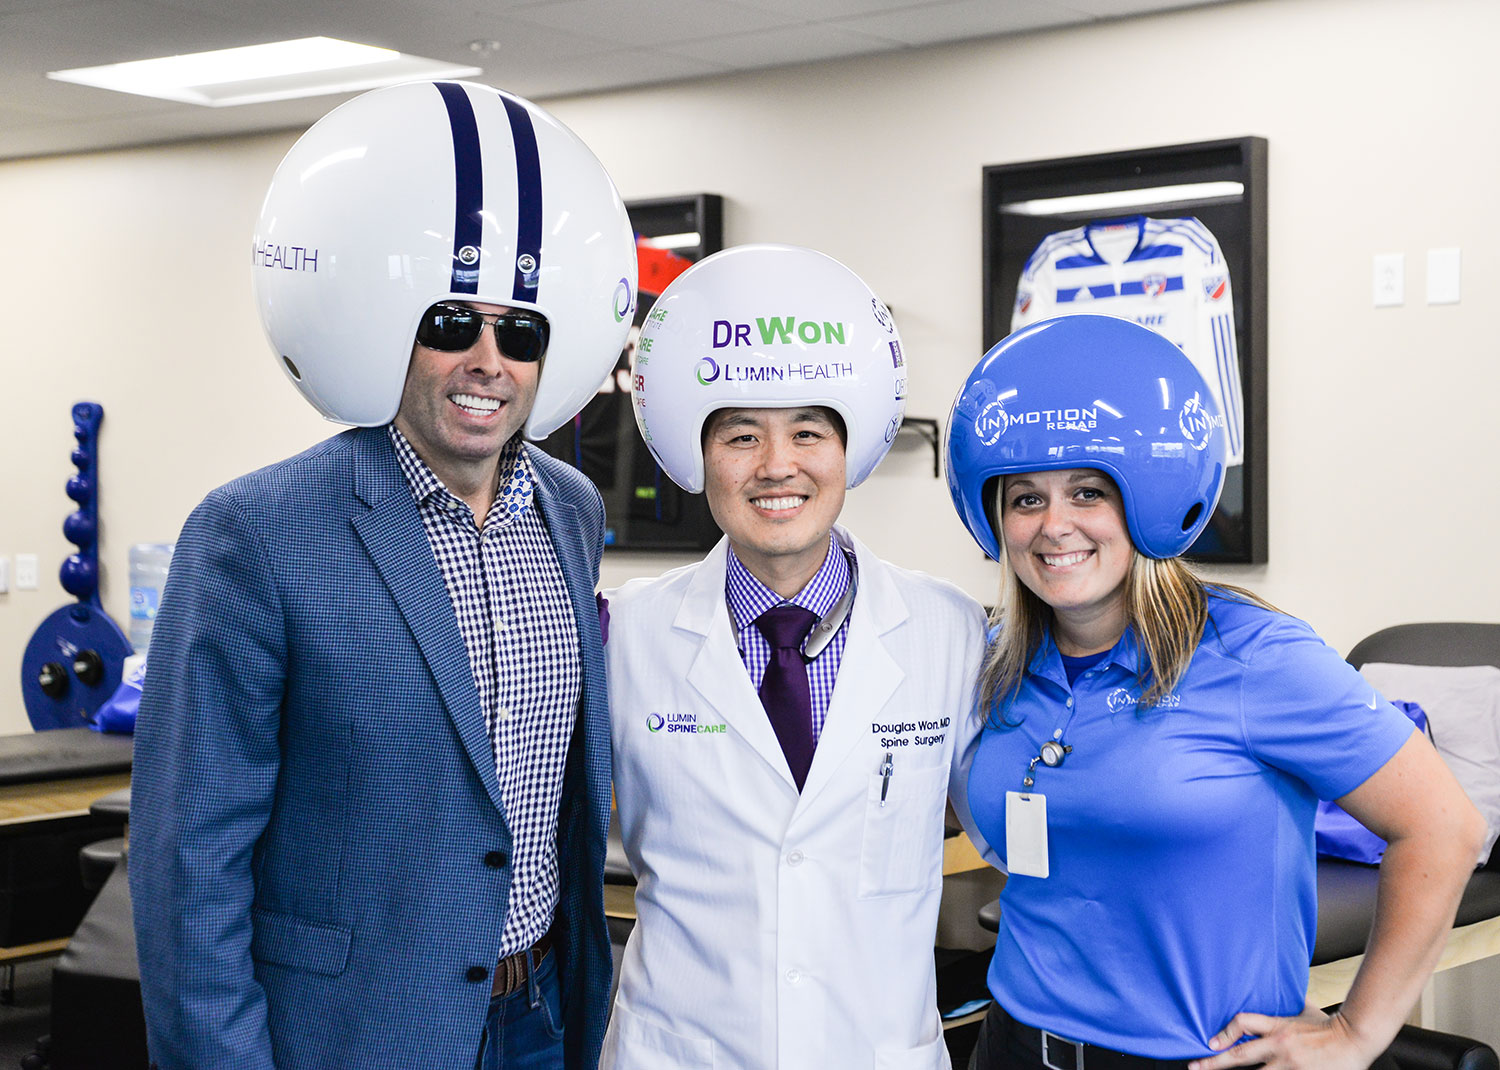 Spine surgeon and CEO of Lumin Health, Dr. Douglas Won (center), is pictured with Gregg "Wreckin' Ball" Wilson and Michelle Zammit, rehab and durable medical equipment director, in the InMotion Rehab of Lumin Health Center in Plano. Mr. Wilson is the inventor of the customizable Wreckin’ Ball Helmets.